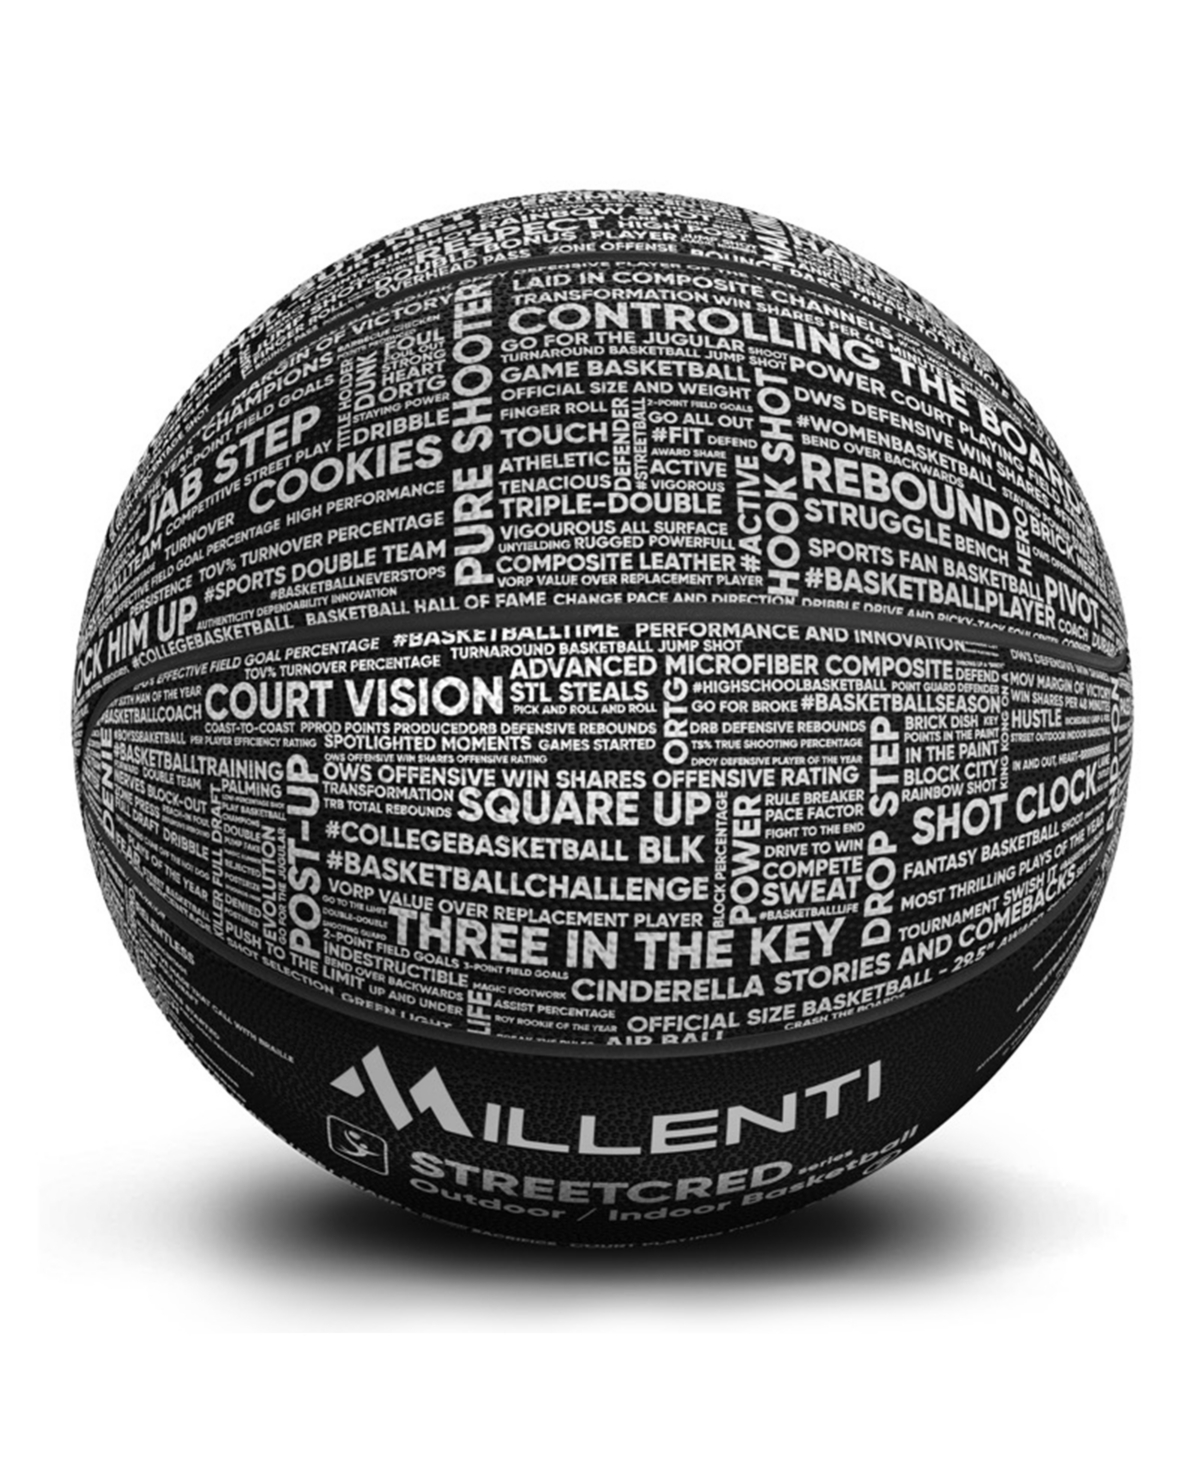 Millenti Basketball Official Size 7 Outdoor Indoor Ball Streetcred - Lingo With Chick Hearn Classic One Liner In Silver-tone